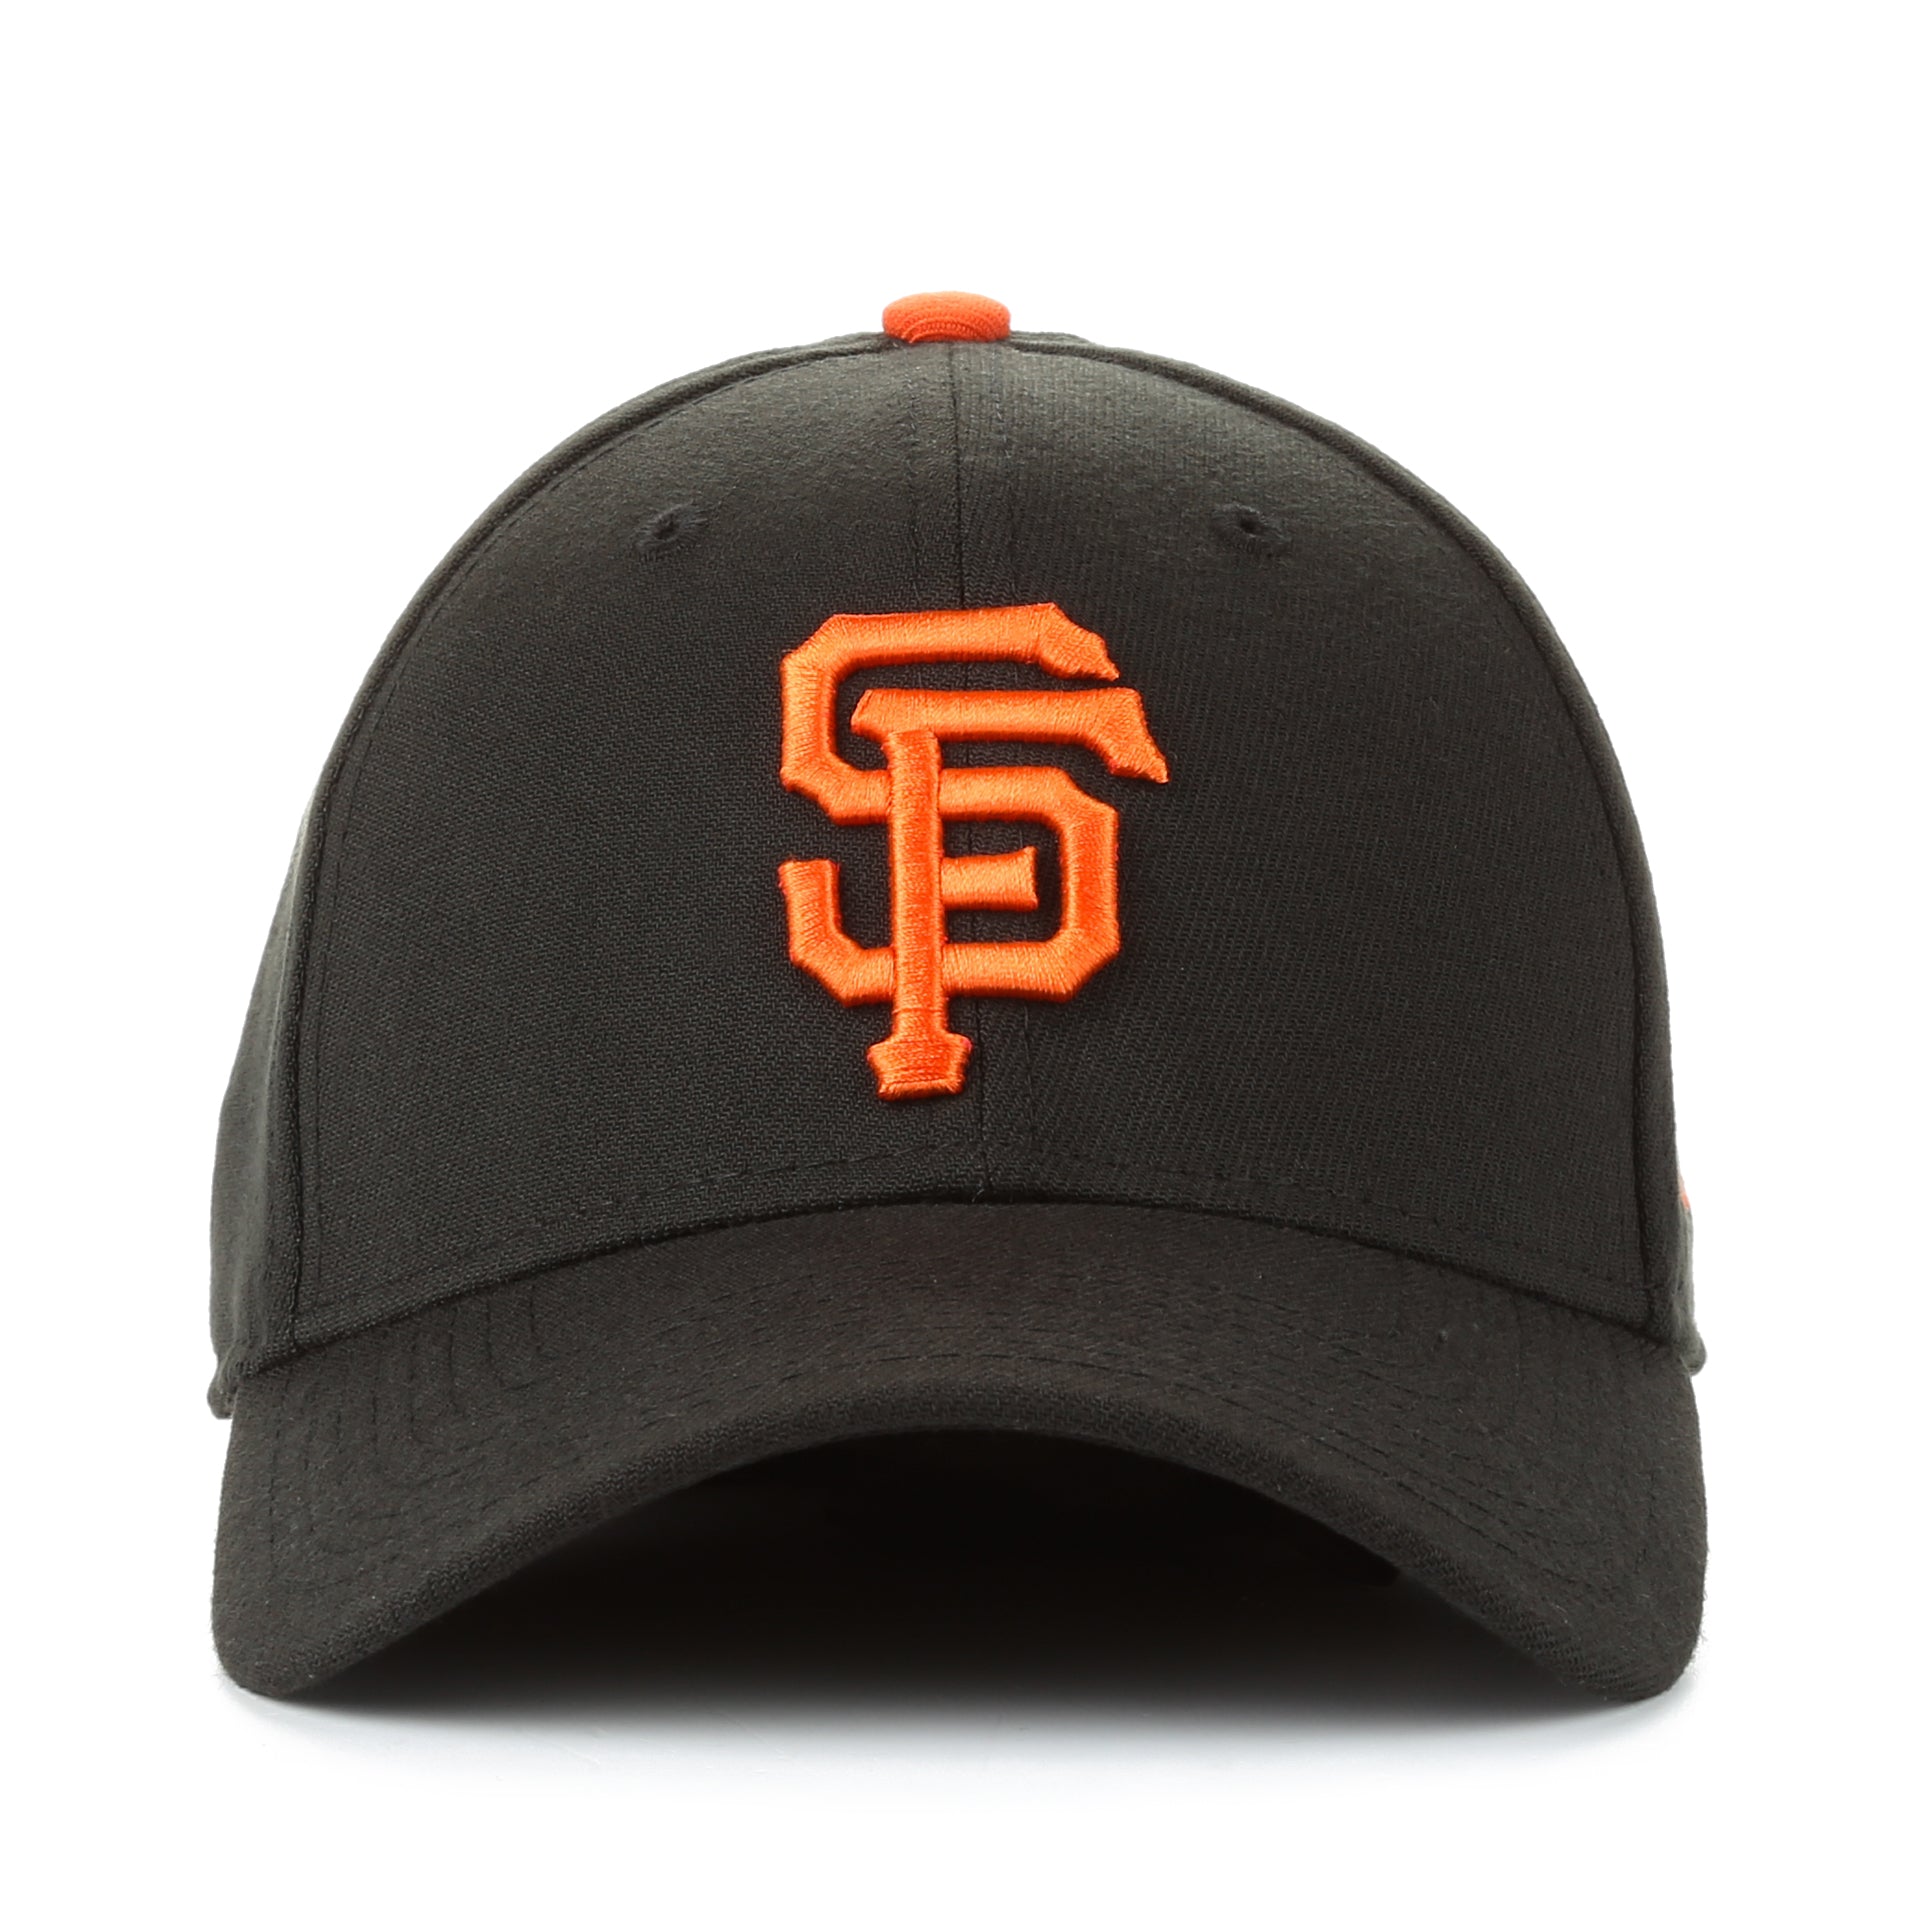 New Era 9Forty The League Game Cap - San Francisco Giants/Black - New Star